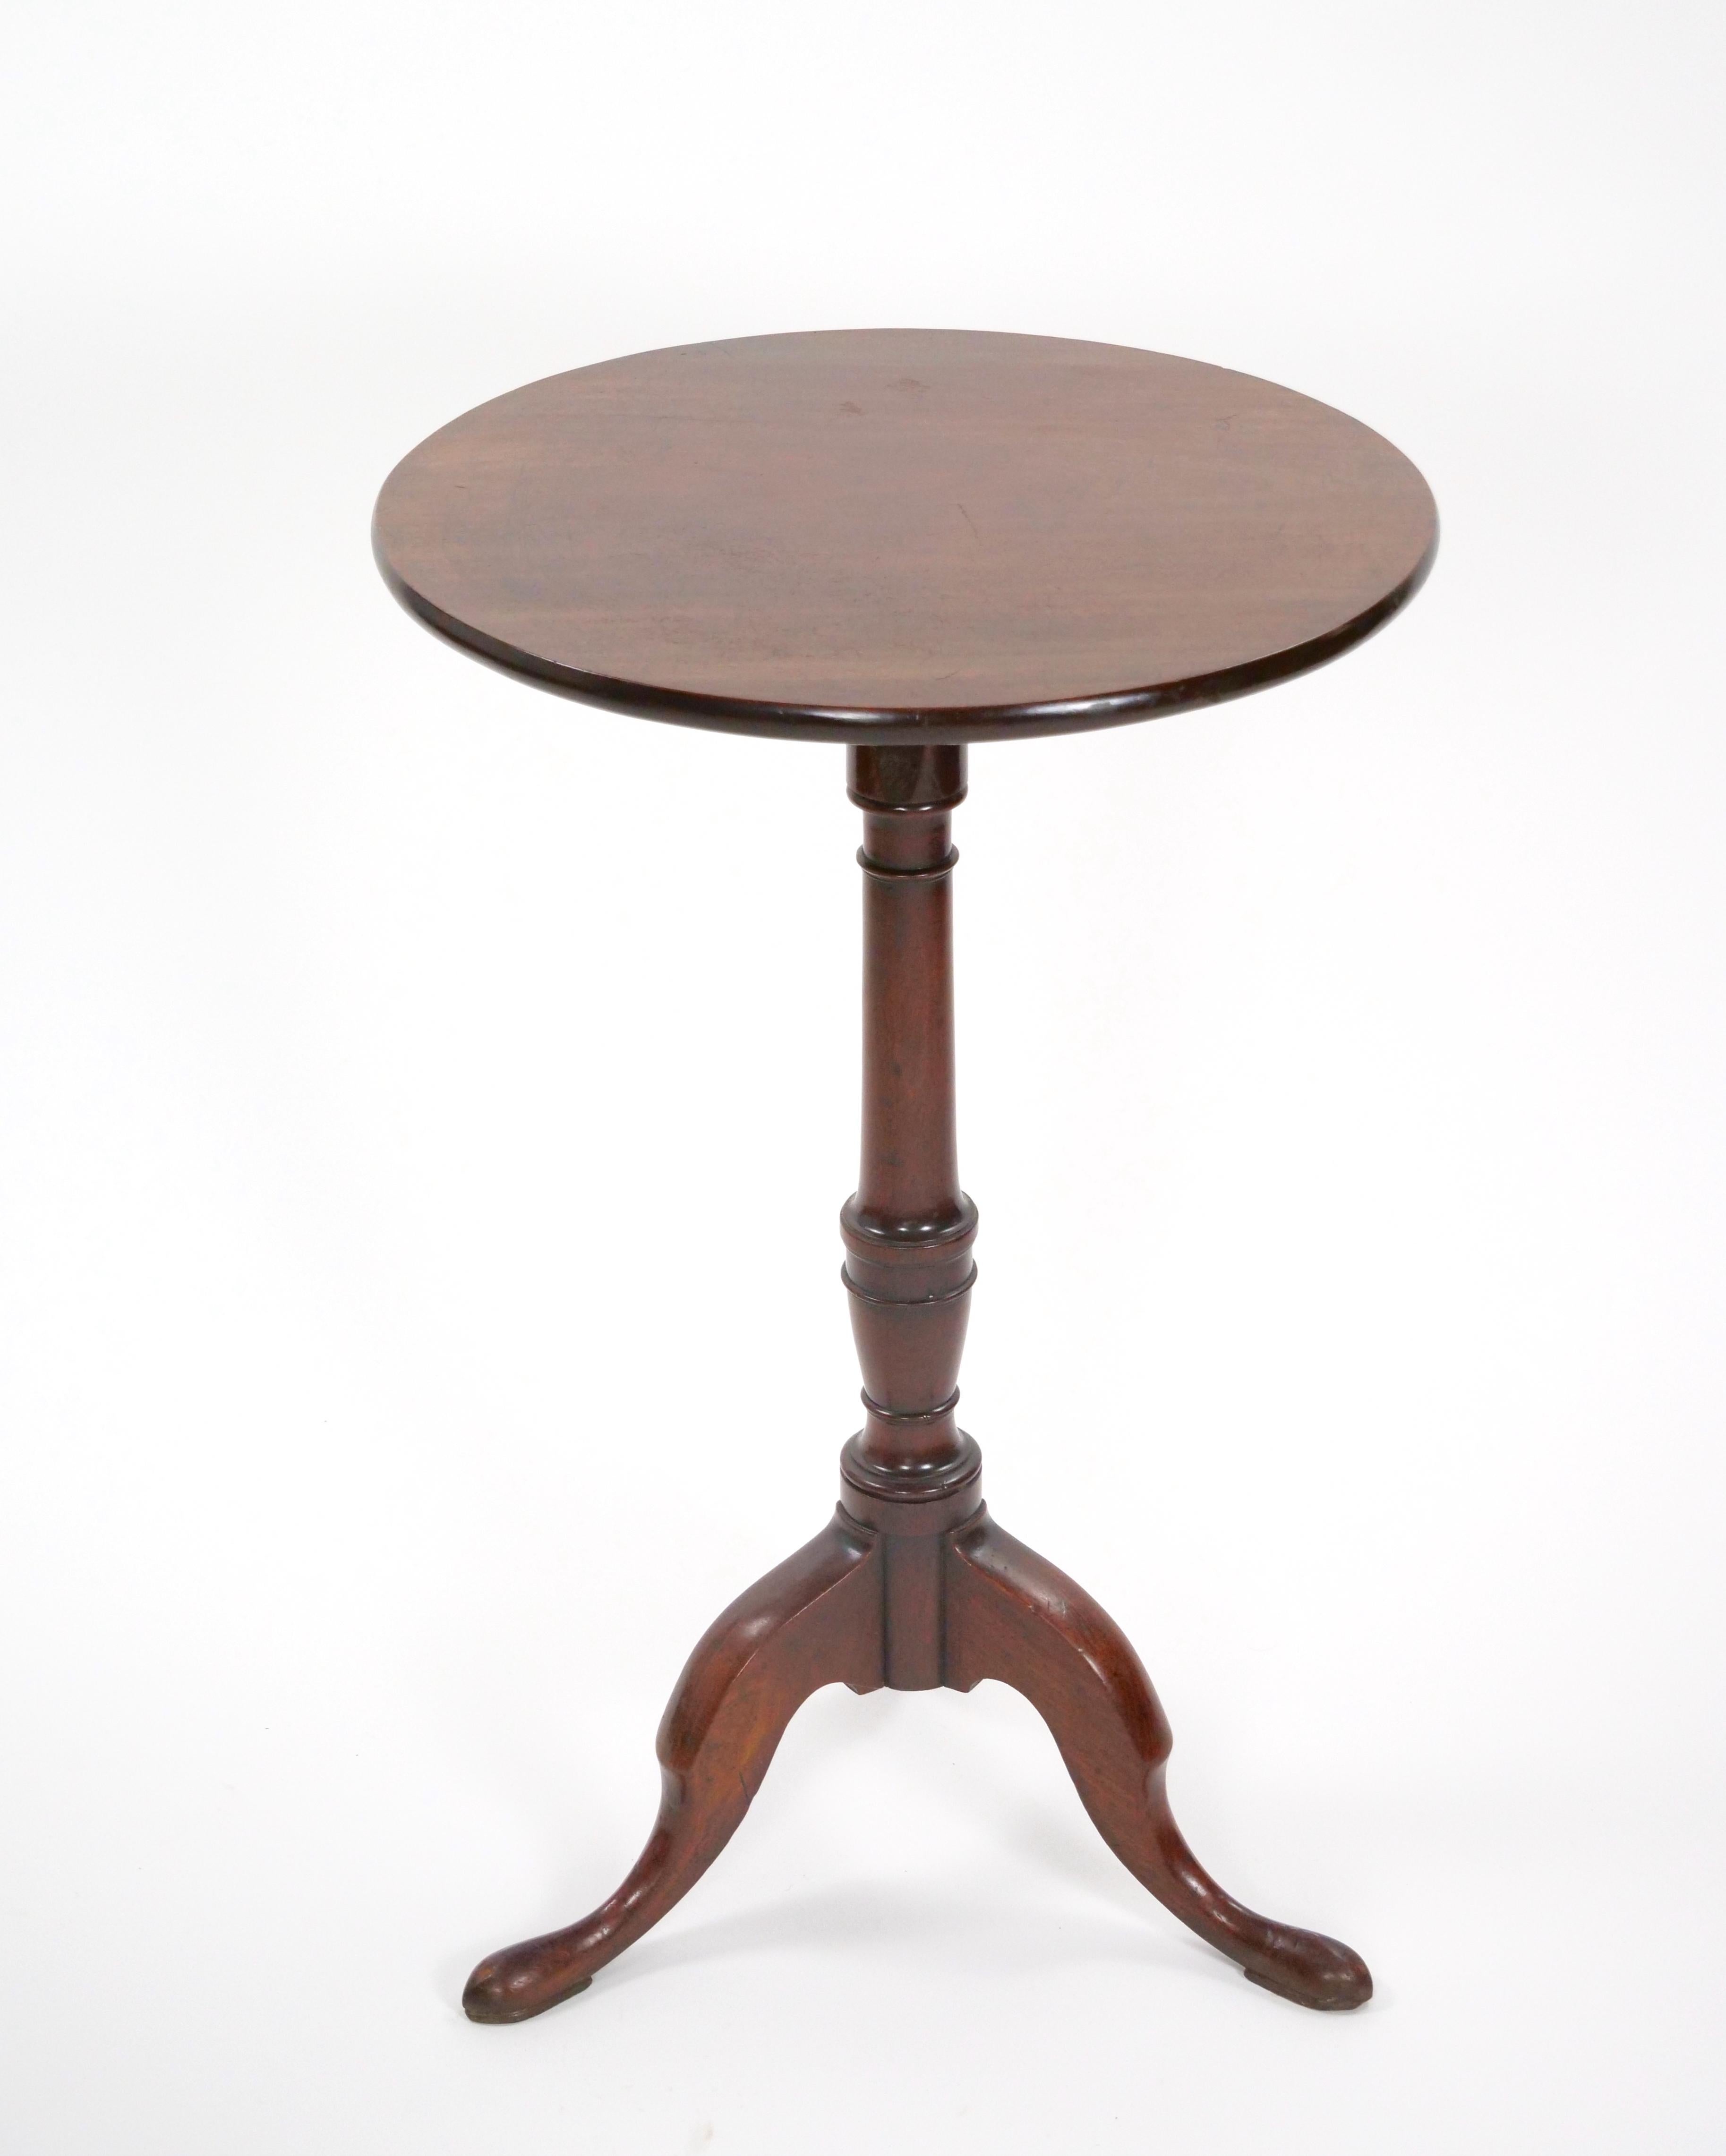 European 19th Century Victorian Mahogany Tripod Pedestal Candle Stand For Sale